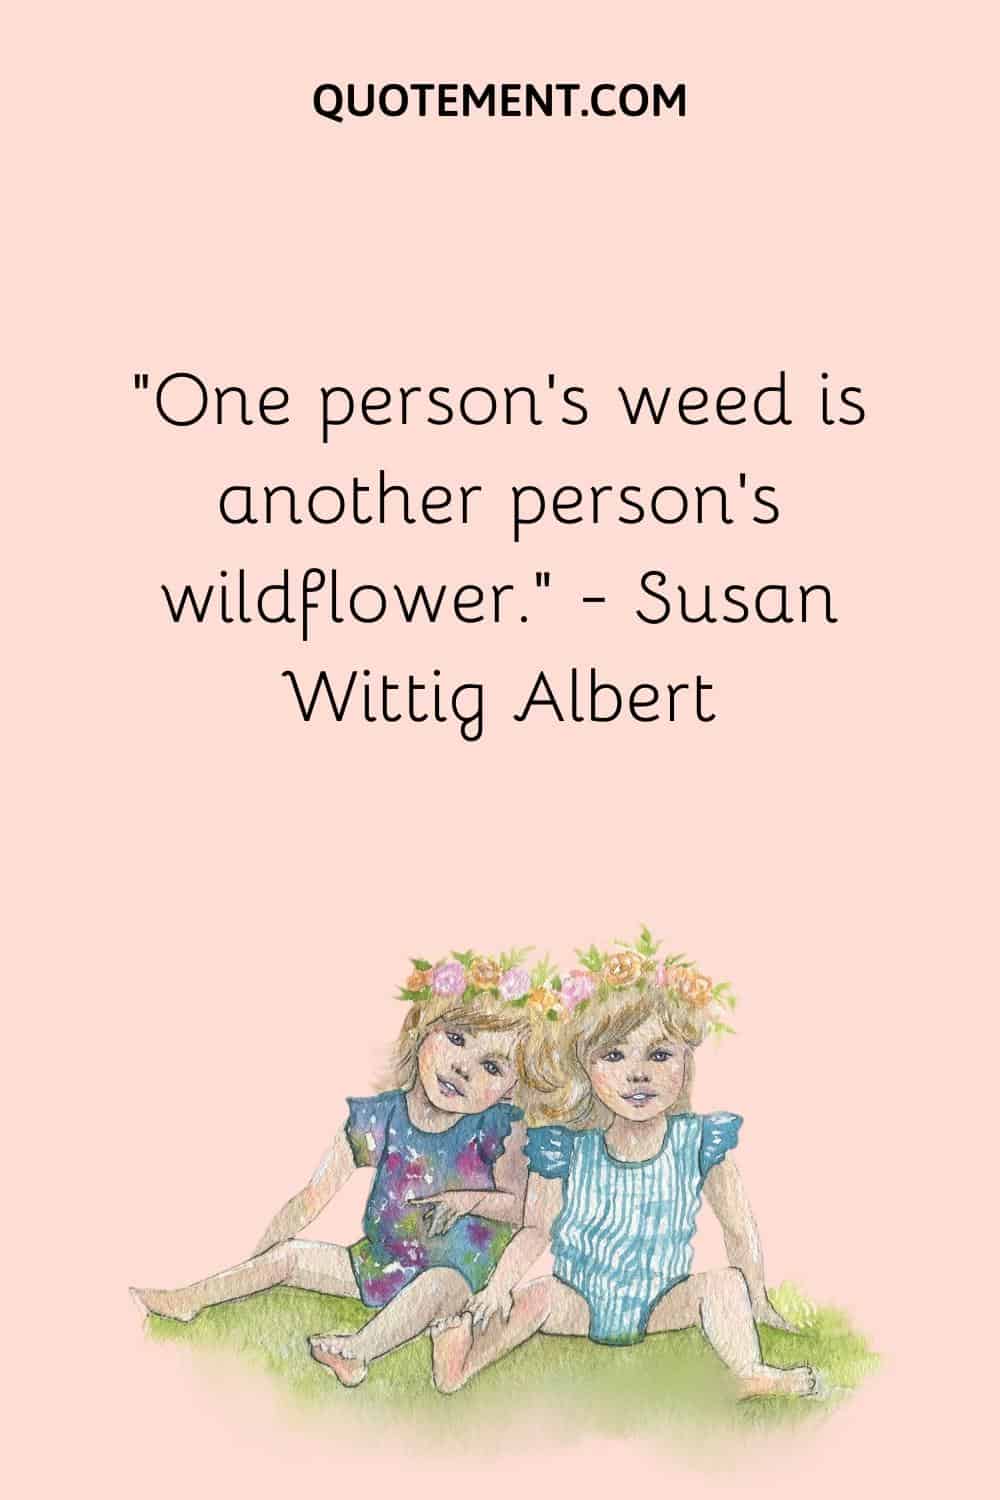 “One person’s weed is another person’s wildflower.” ― Susan Wittig Albert